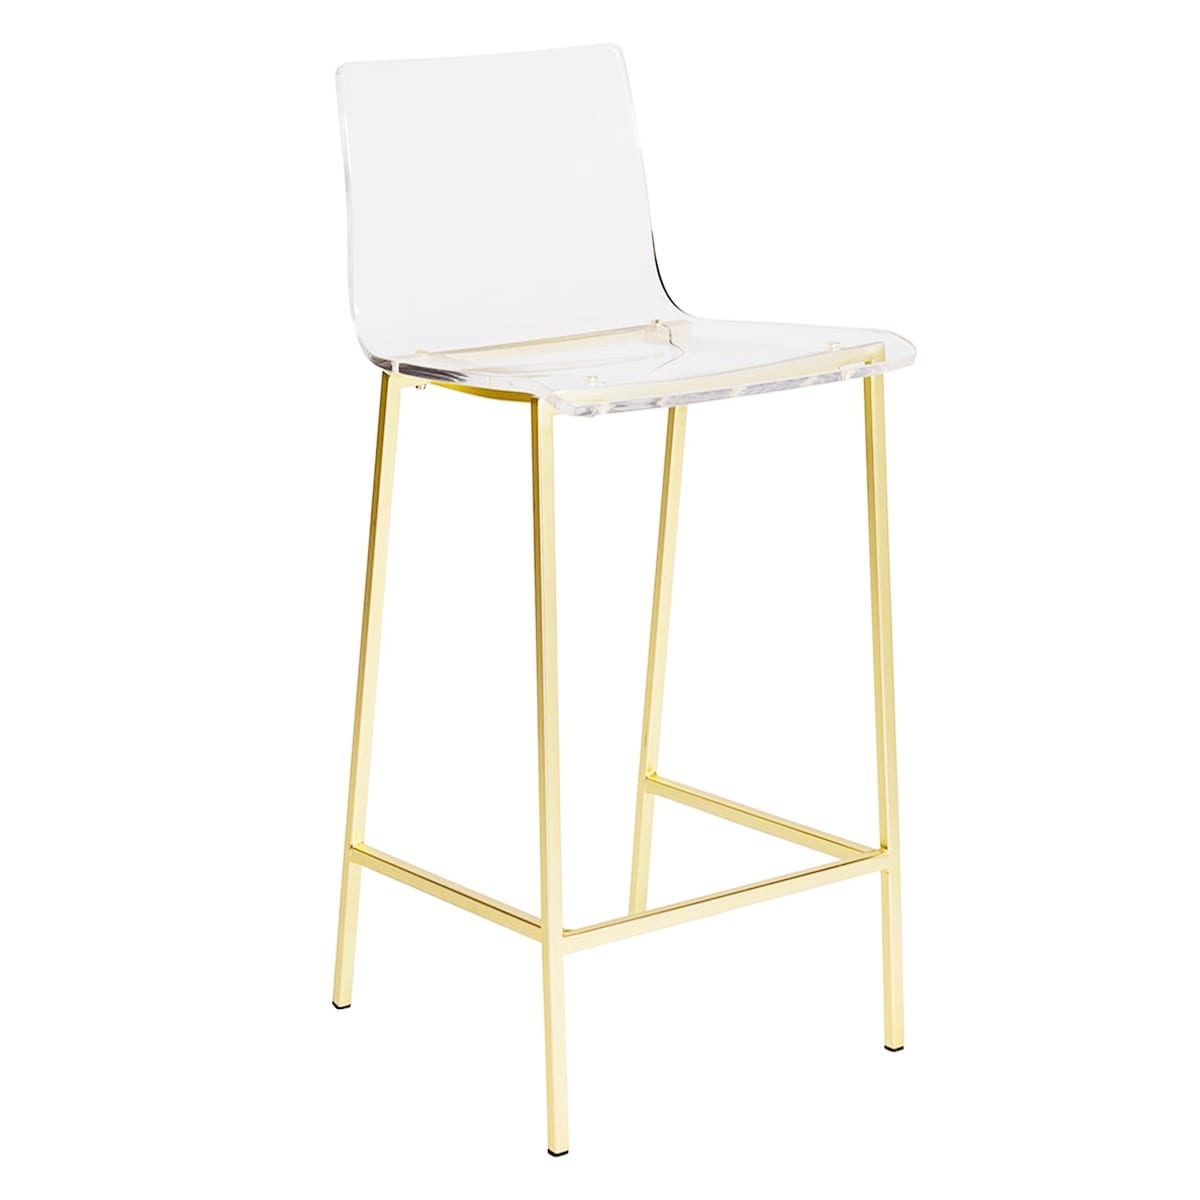 MH Felix Acrylic Stool with Gold Base - Set of Two